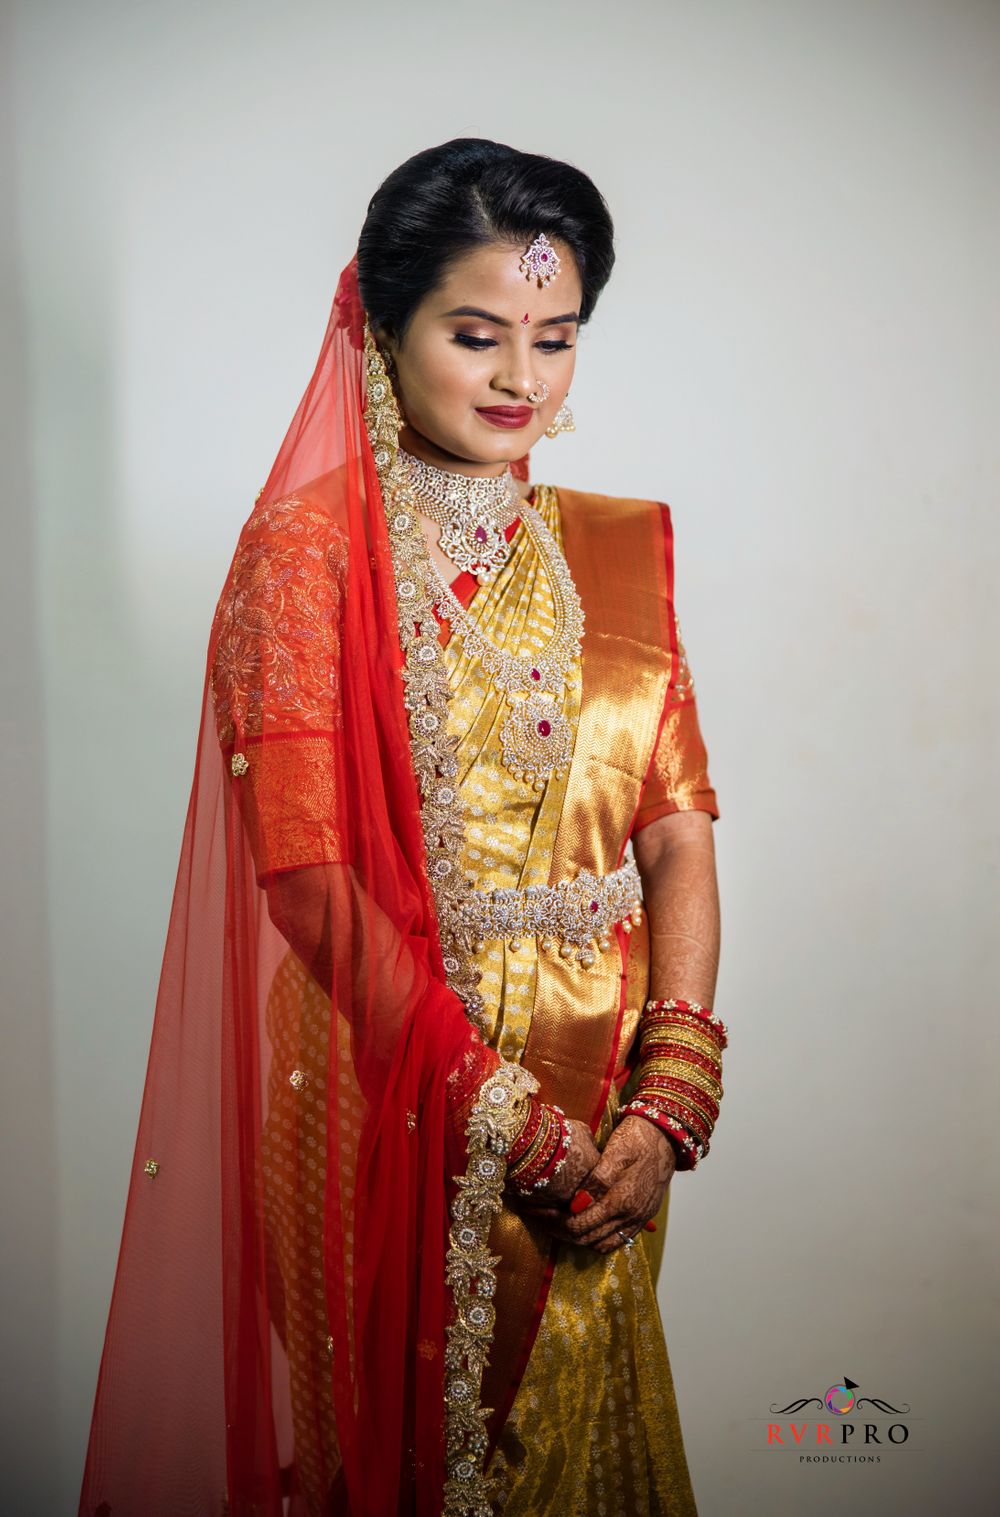 Photo of South Indian bride in red & gold saree